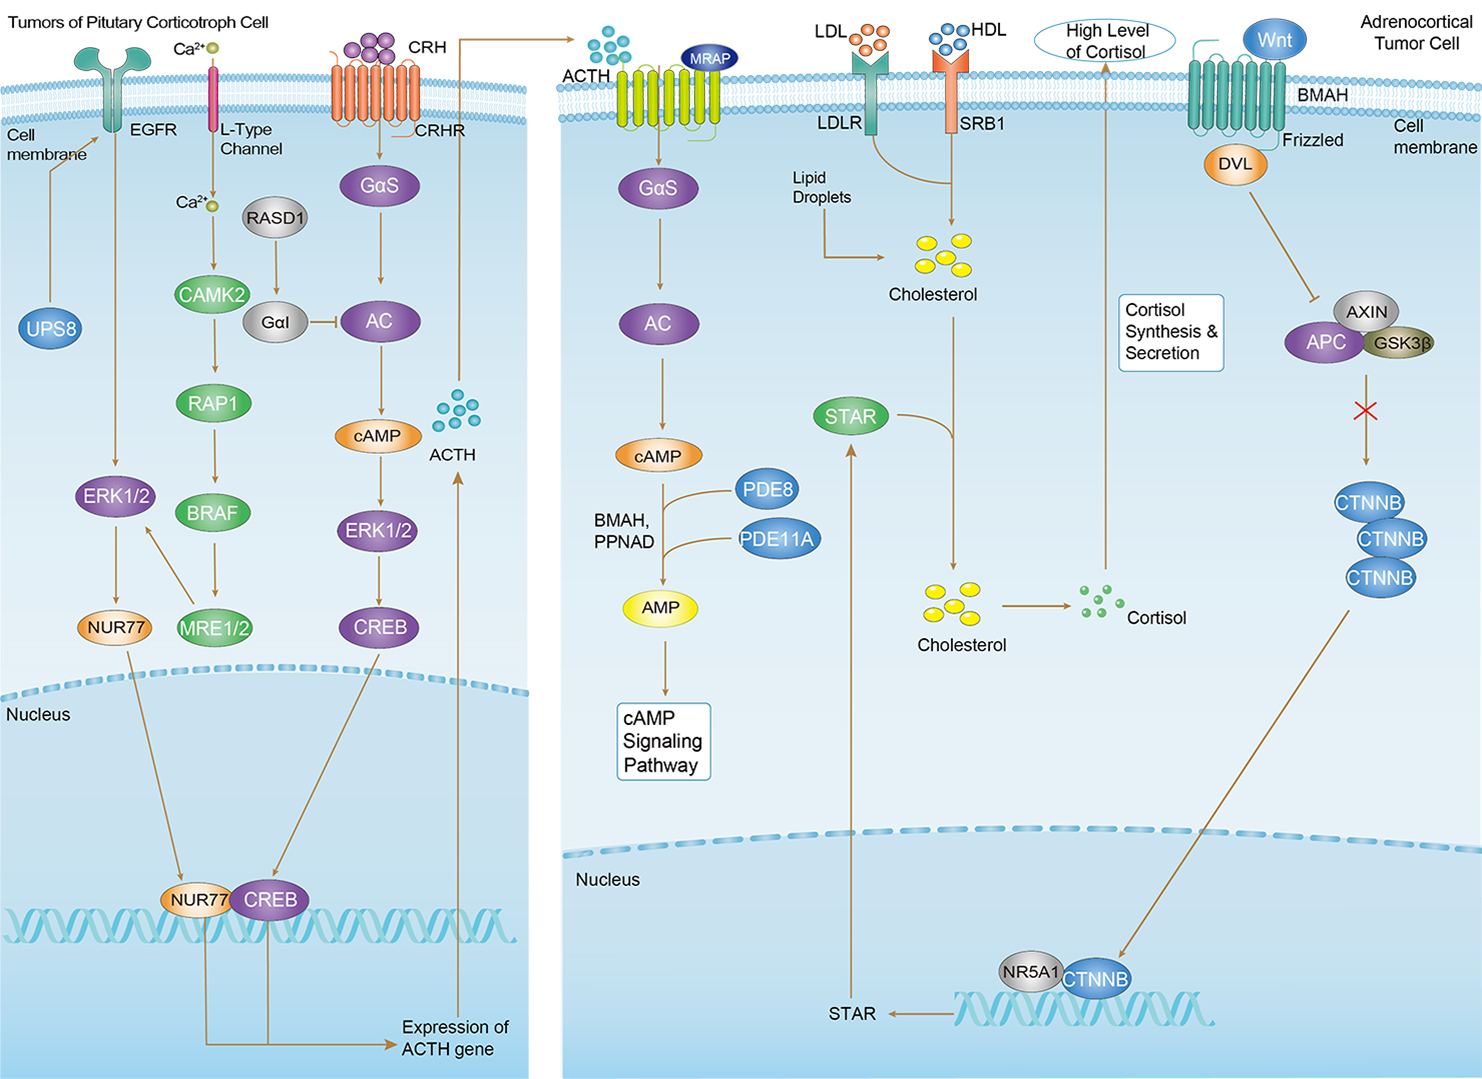 Cushing Syndrome Overview - Pathways, Diagnosis, Targeted Therapies